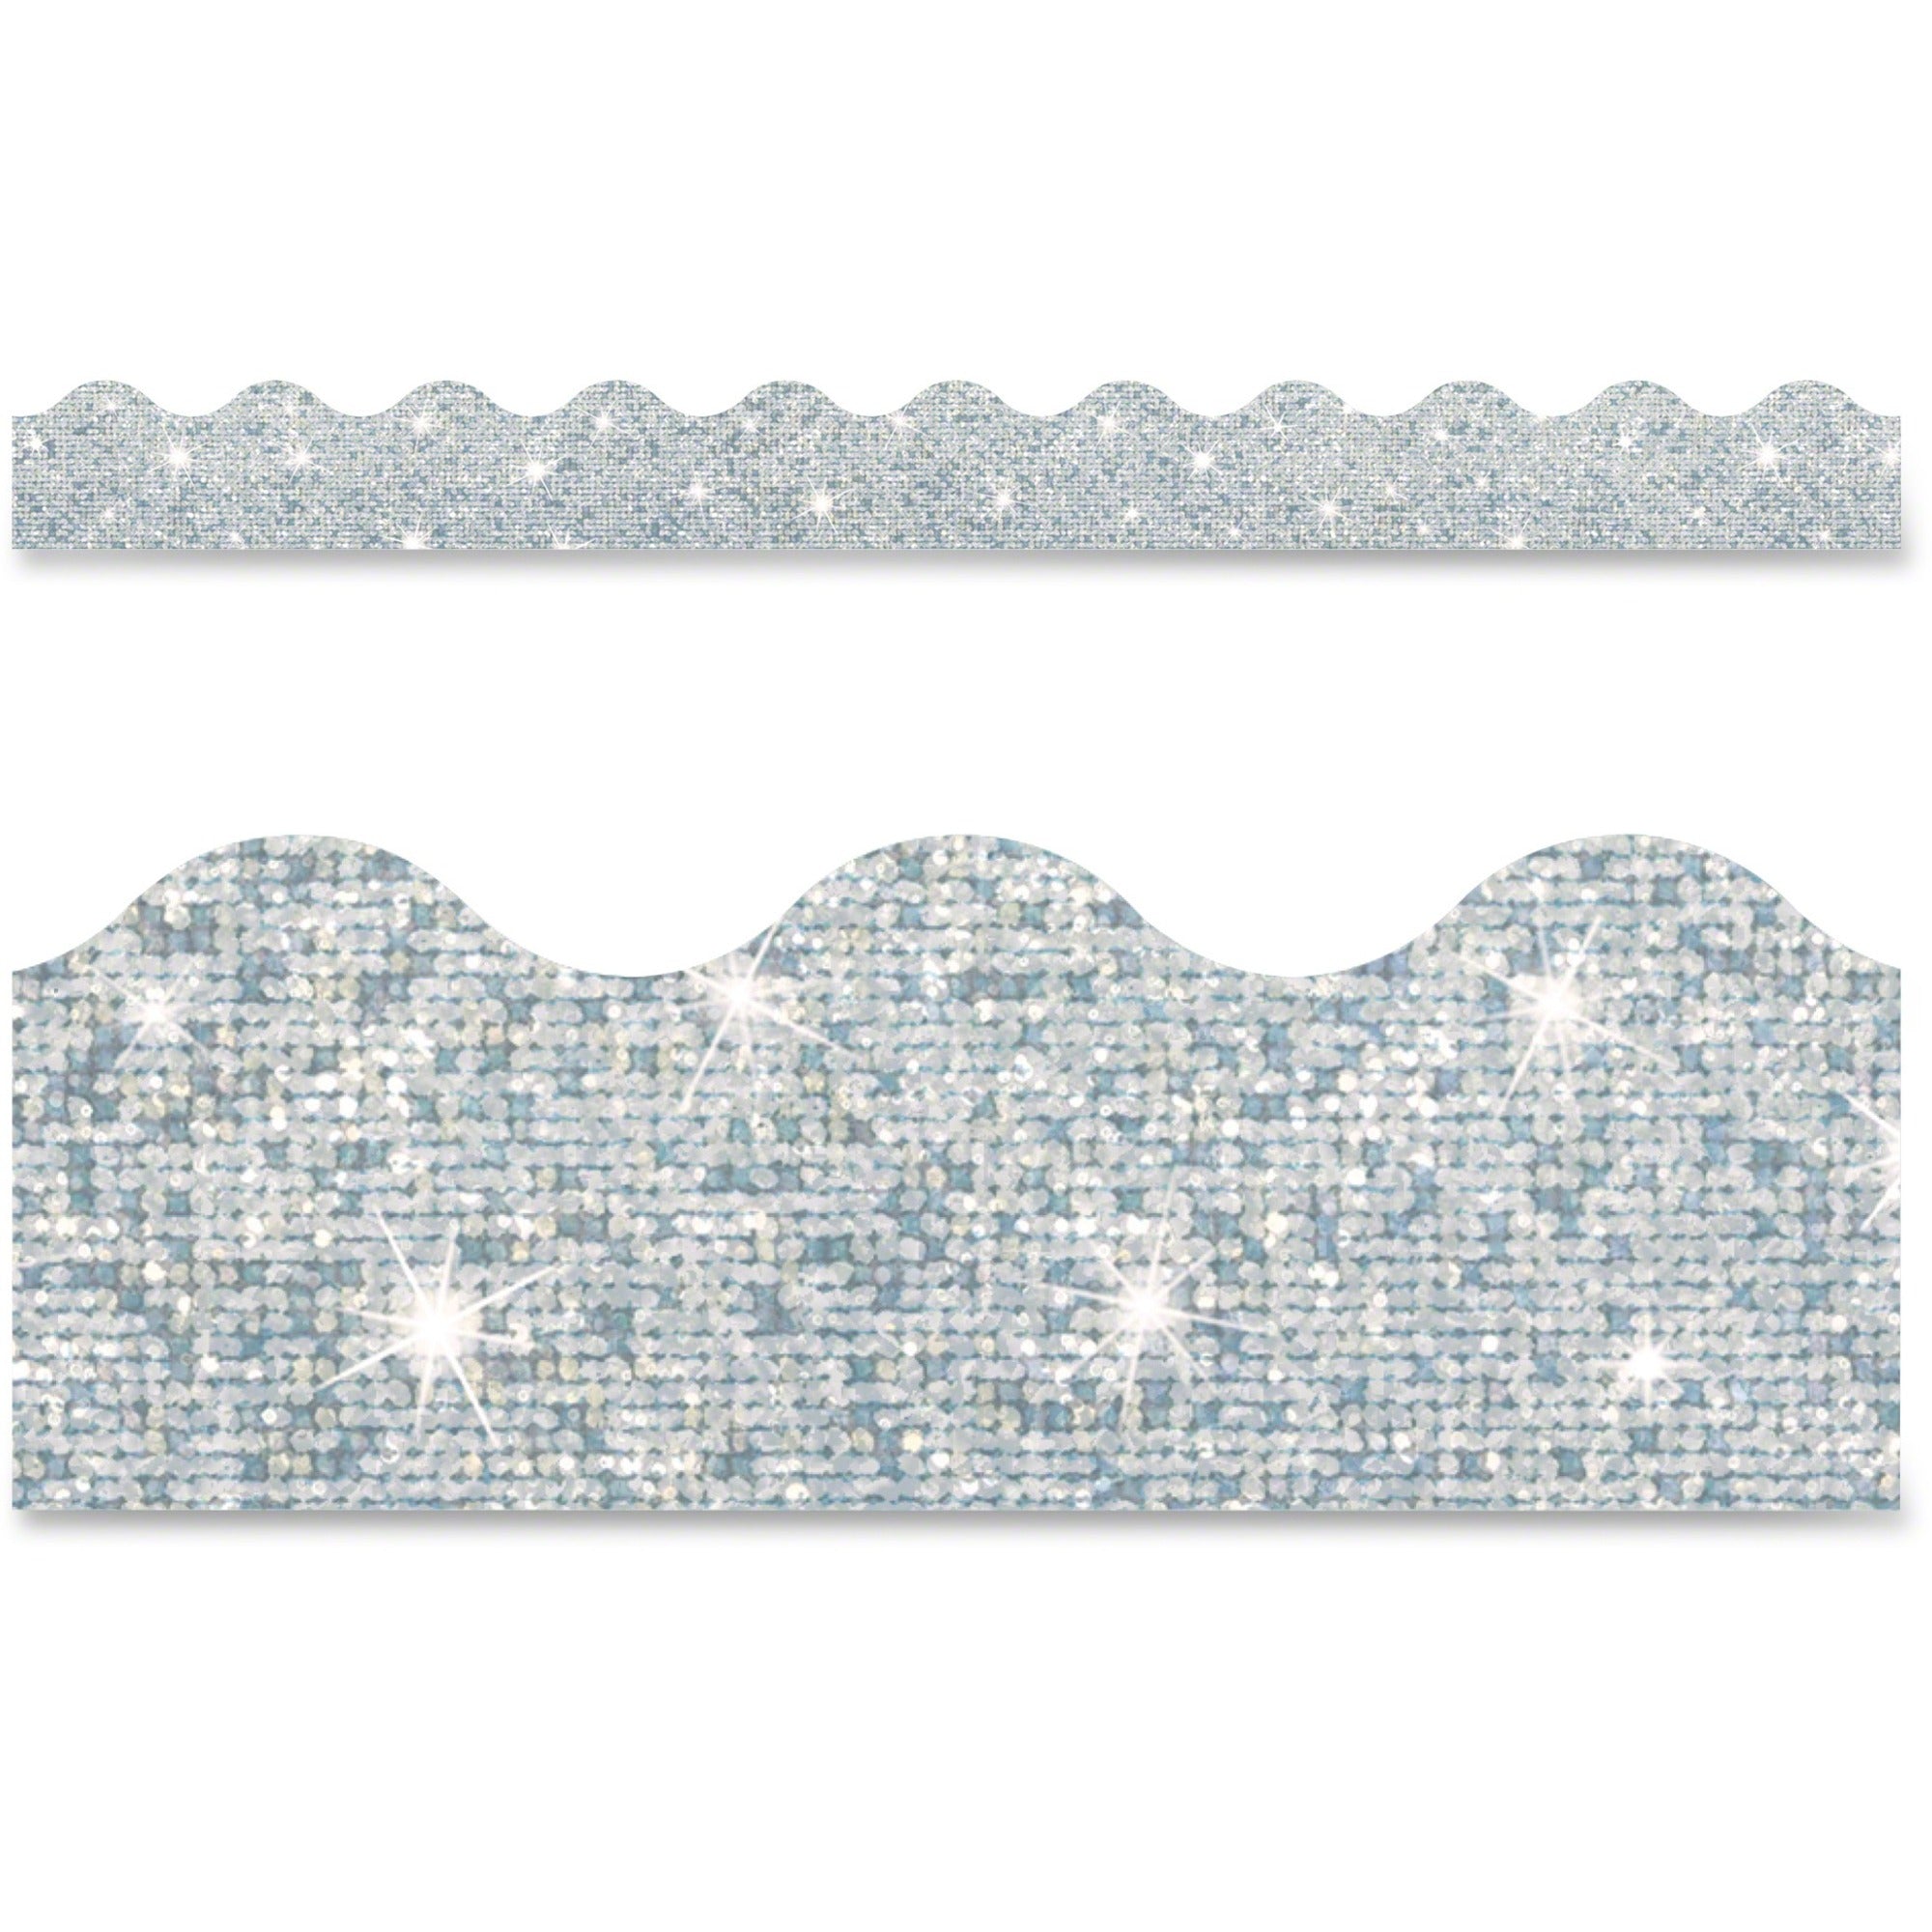 Trend Sparkle Board Trimmers - Rectangle Topped With Waves Shape - Pin-up - 0.10" Height x 2.25" Width x 390" Length - Silver - Paper - 1 / Each - 